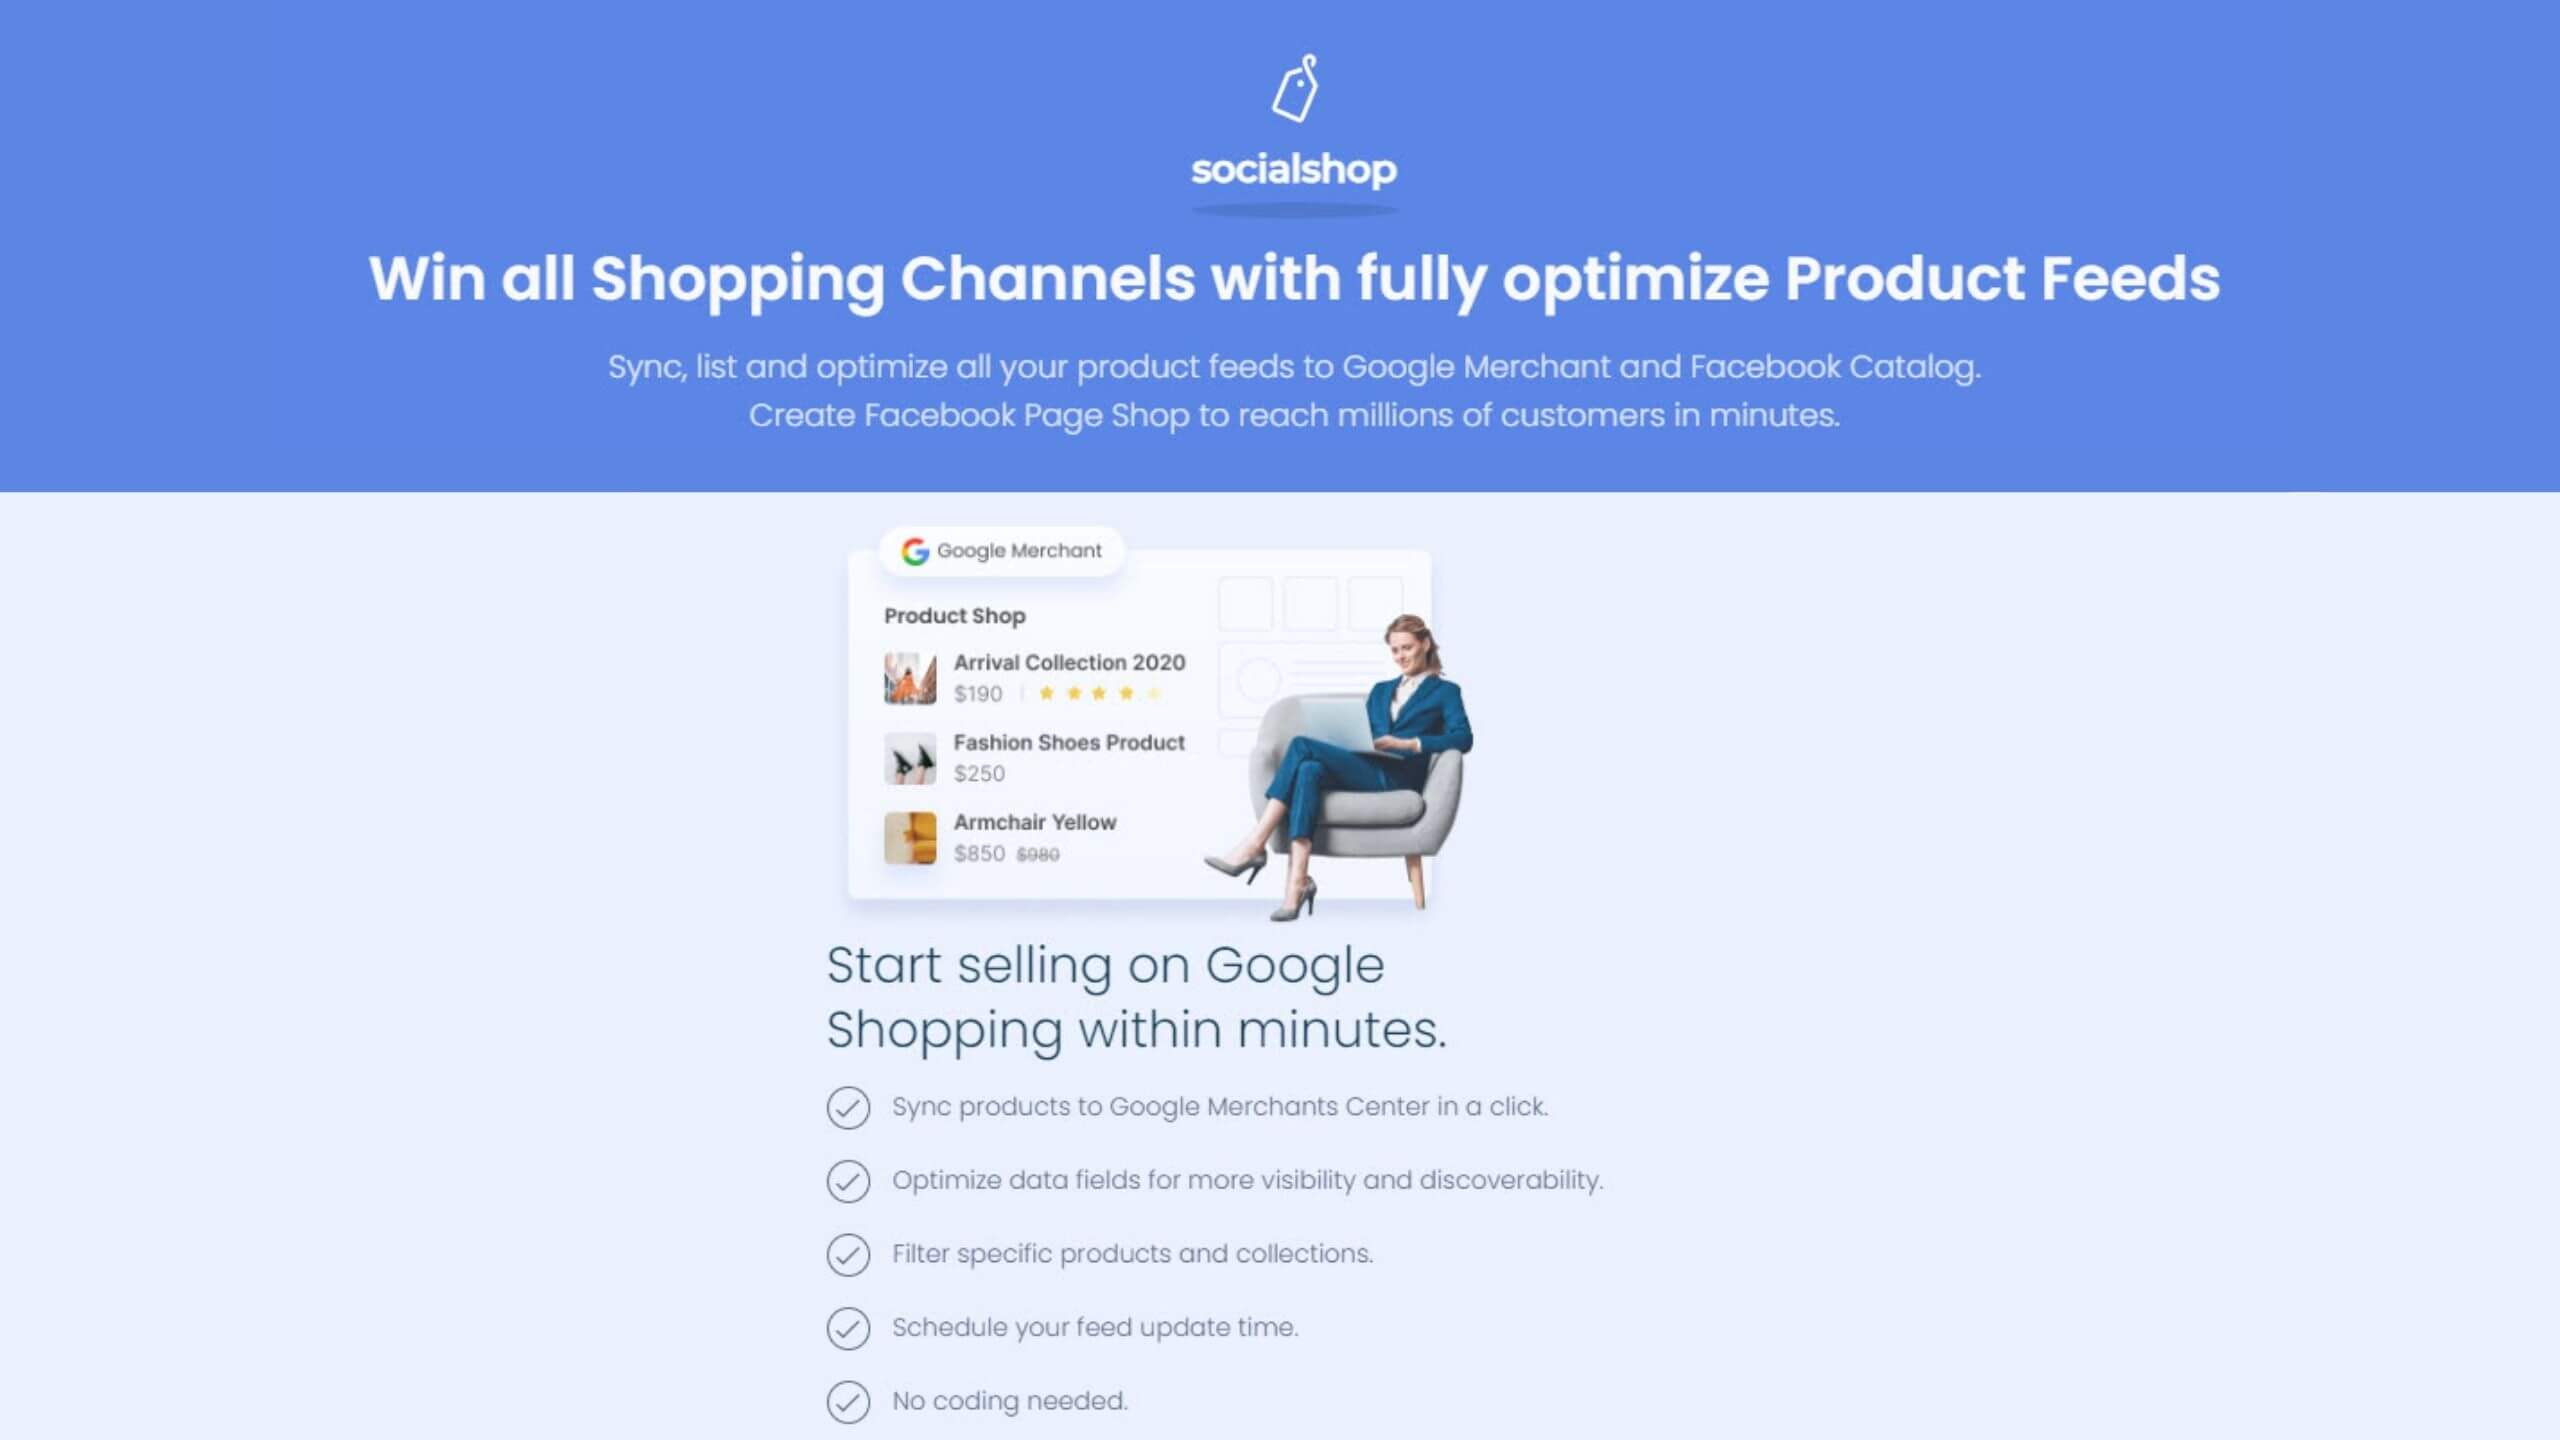 Socialshop support you create and sync products to Google Merchant Center from Shopify, WooCommerce, and BigCommerce